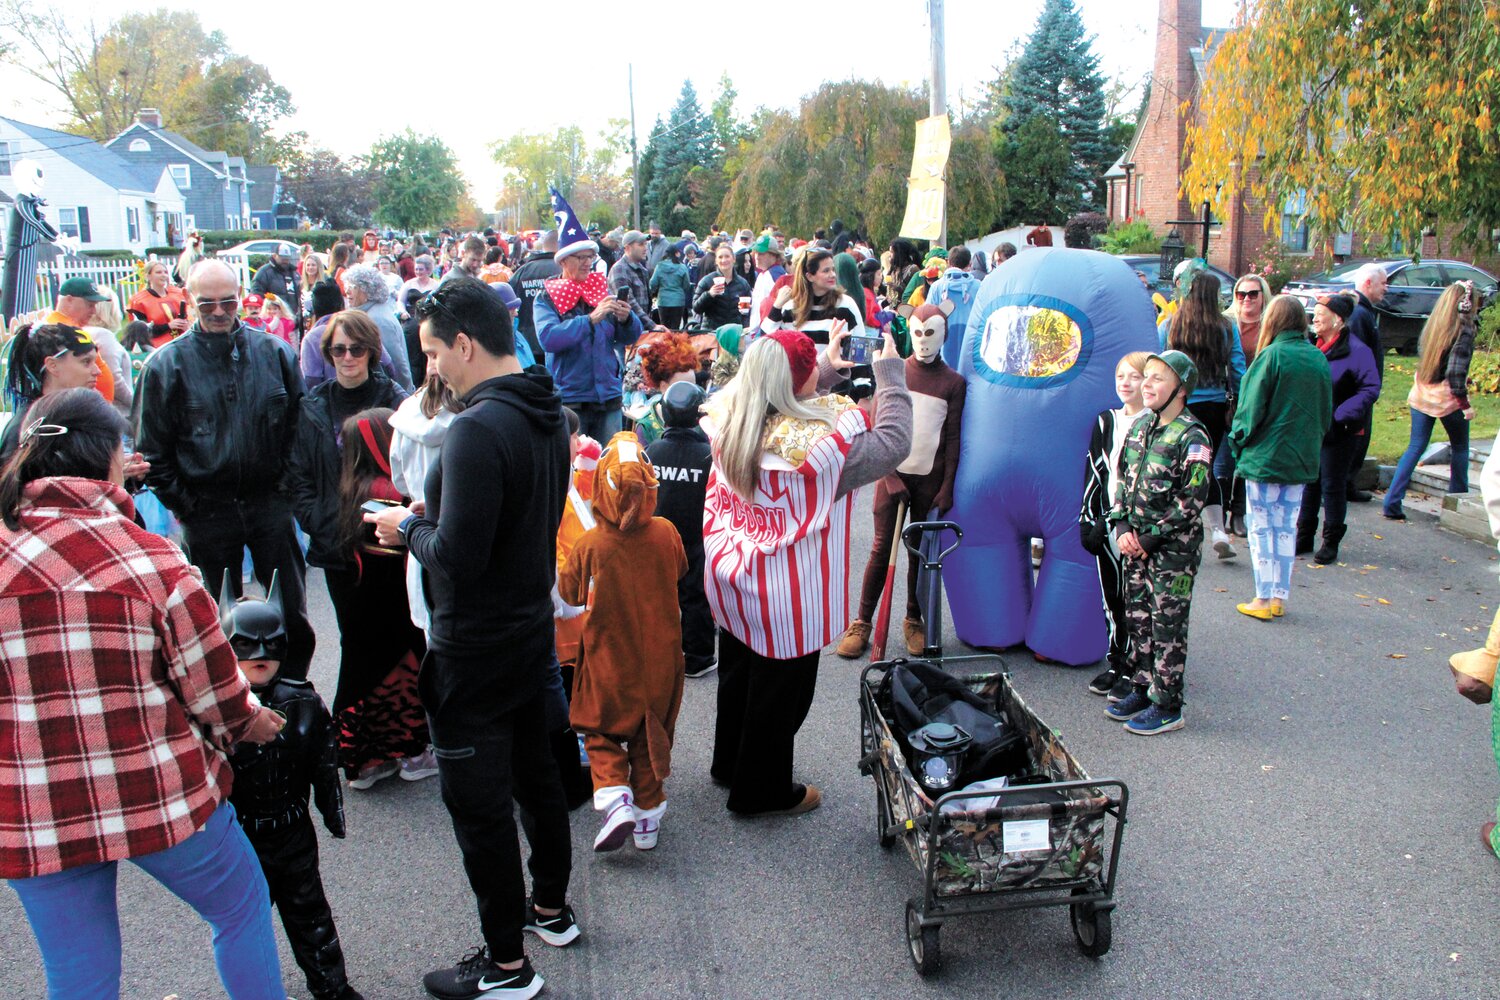 PRE-PARADE: Super heroes, ghouls, ghosts, robots, witches and just about every imaginable character gathered at the Chapman Avenue home of Stacy Capone for the start of Greenwood’s annual Halloween parade.